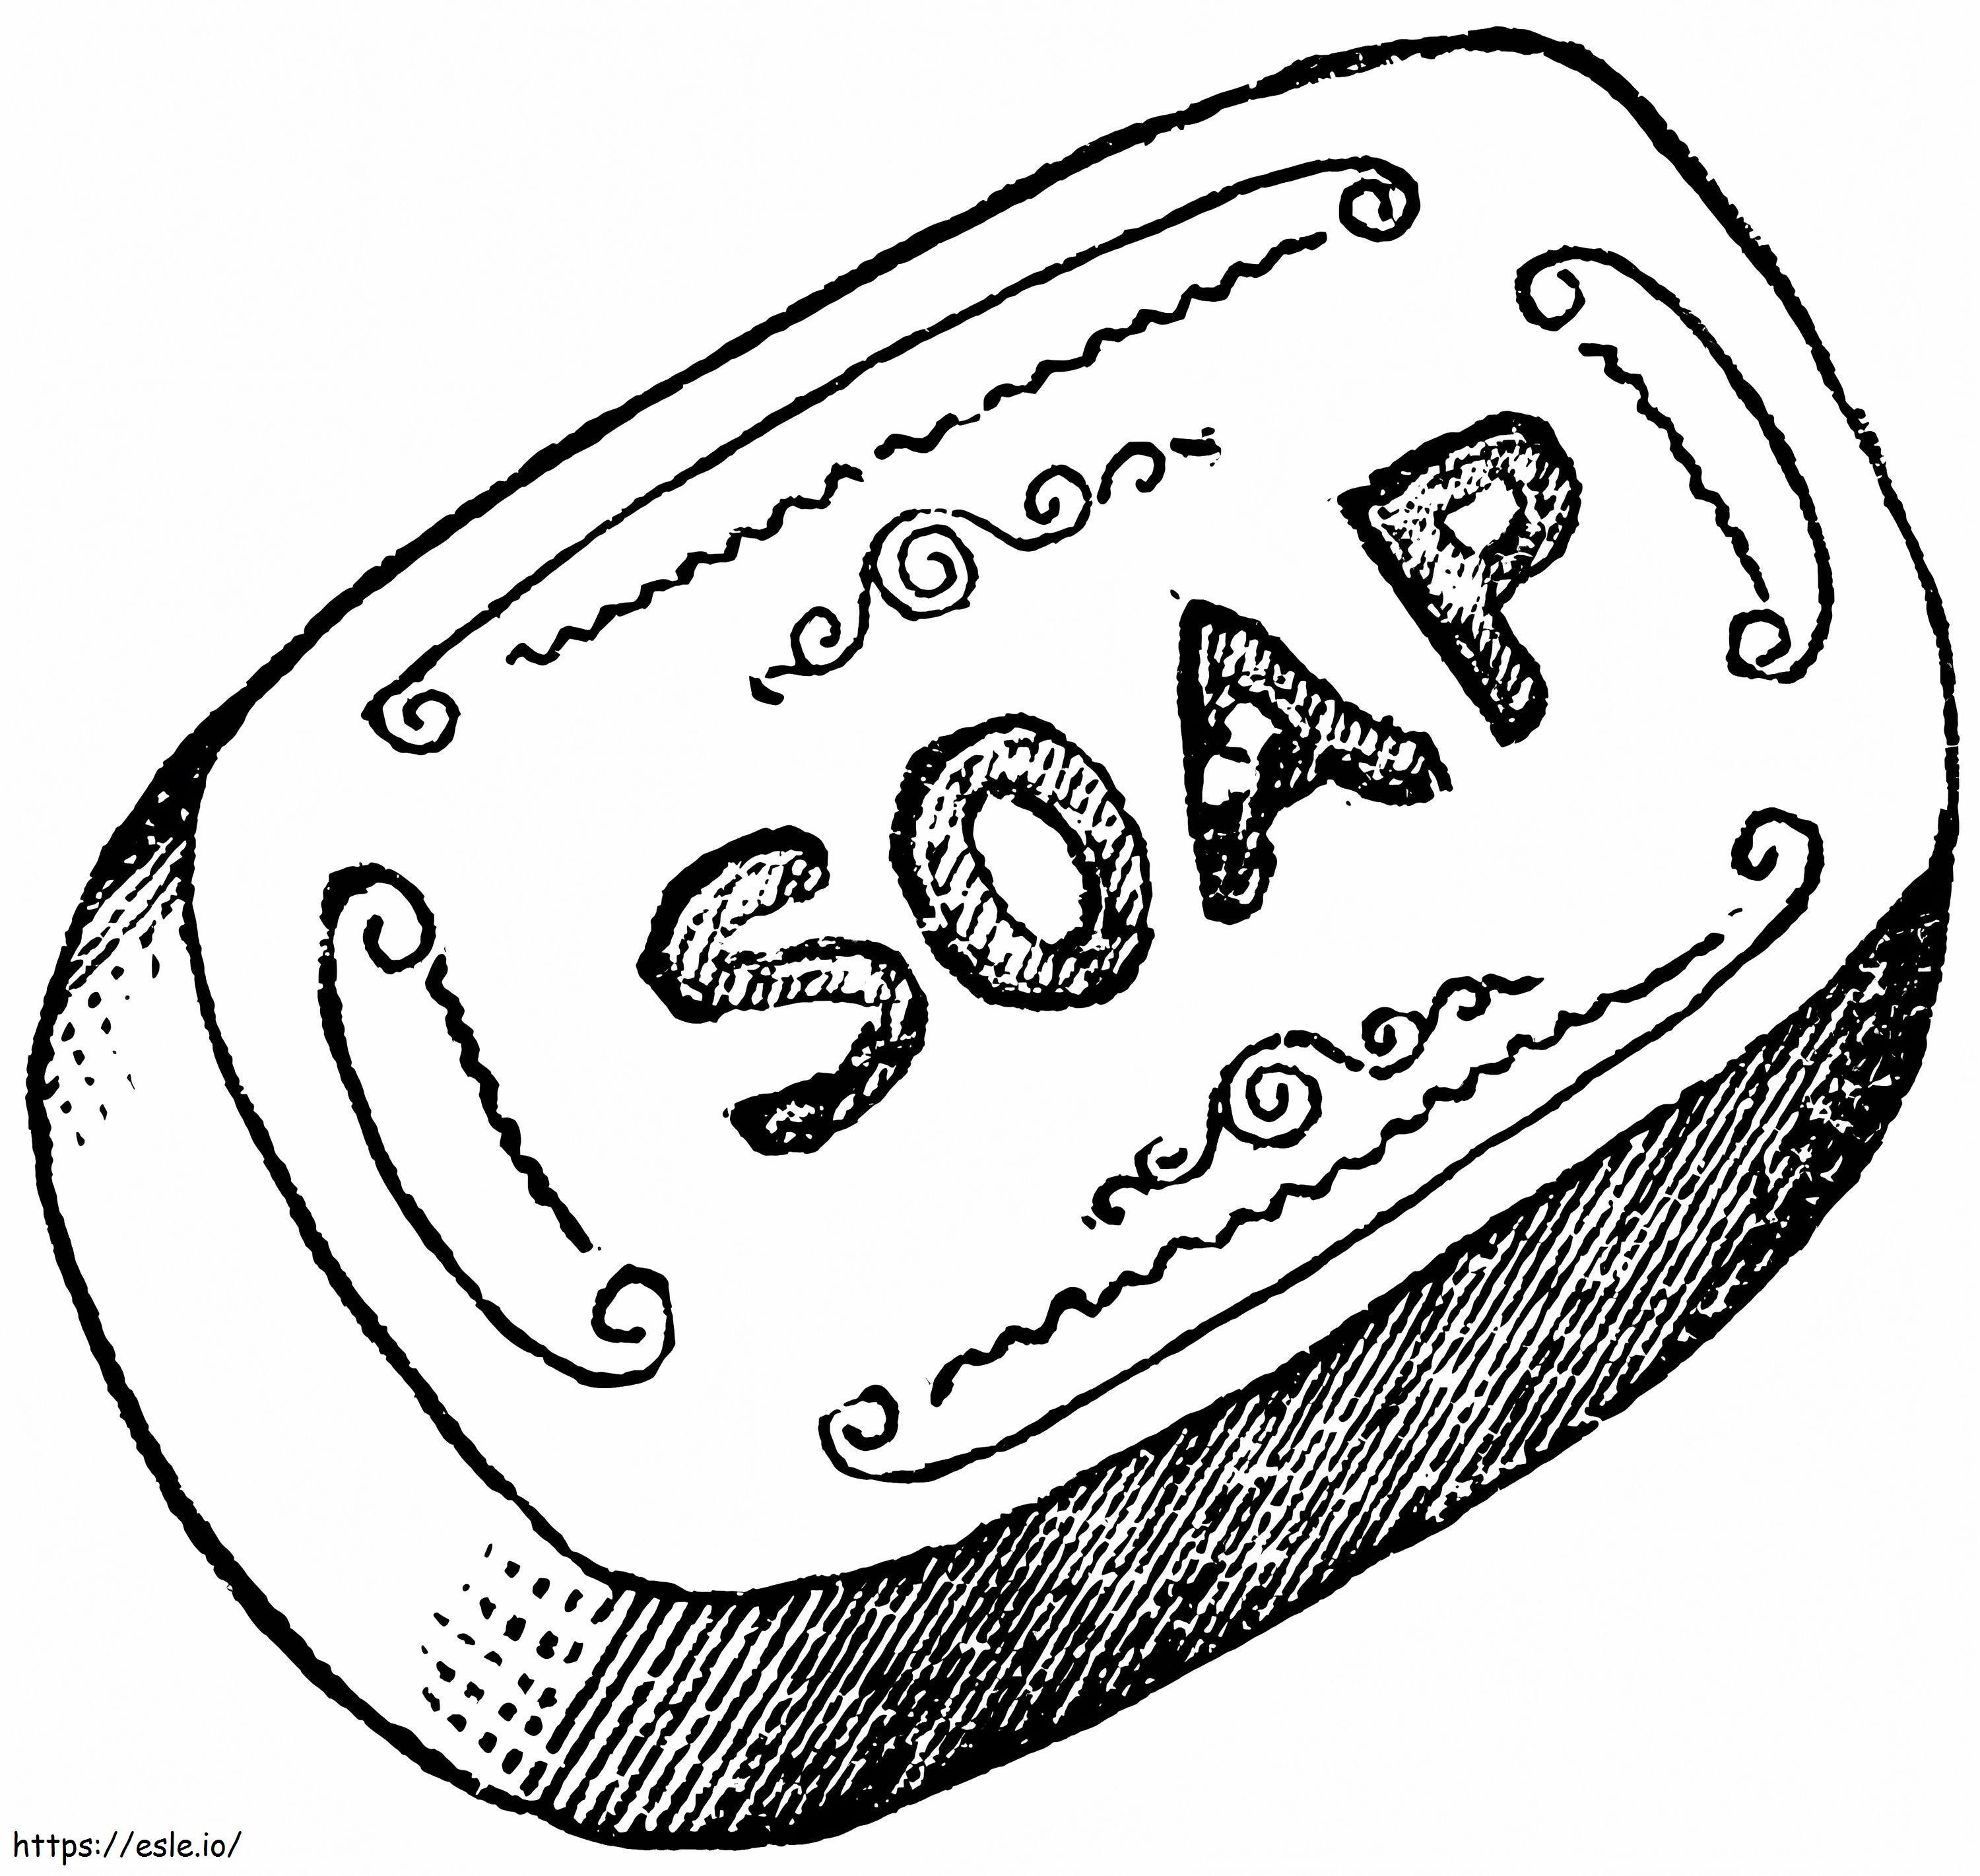 Good Hygiene Soap coloring page